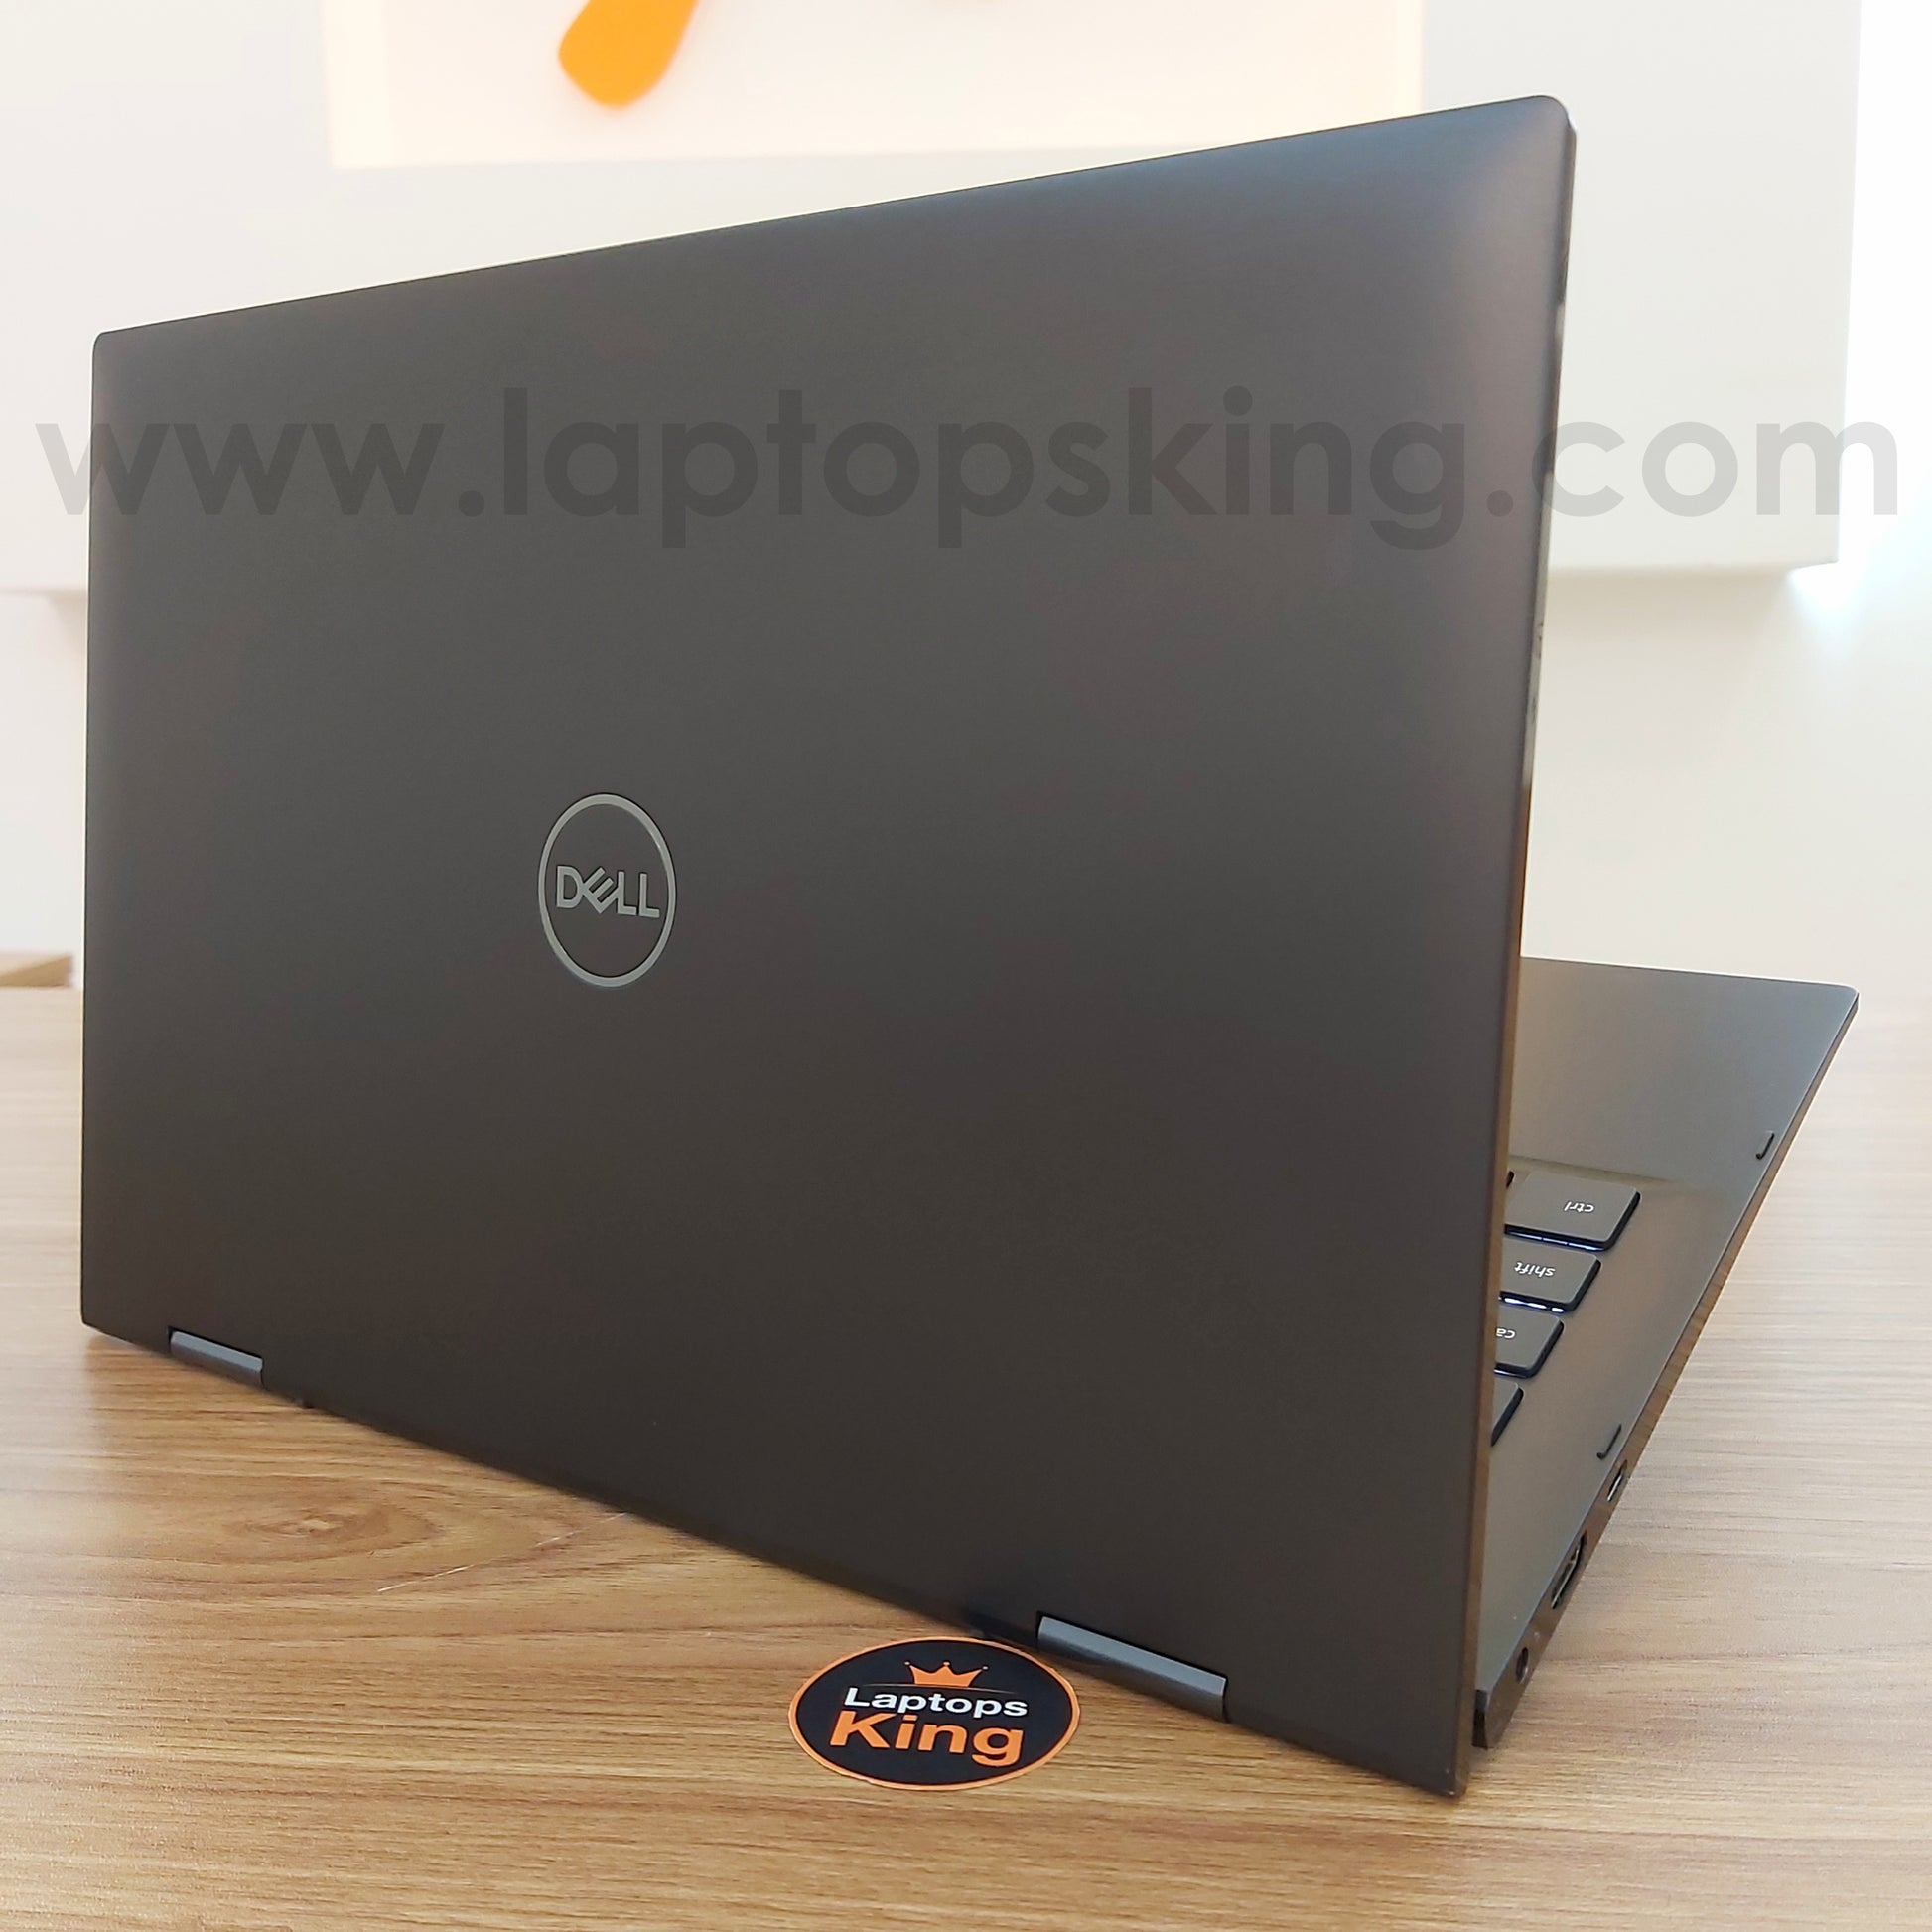 Dell Inspiron 7300 i7-10510U 10th Gen 4K 2in1 Laptop (Used Very Clean) Computer for sale Lebanon, laptop in Lebanon, laptop for sale Lebanon, best programming laptop, laptop for sale in Lebanon, laptops for sale in Lebanon, laptop for sale in Lebanon, buy computer Lebanon, buy laptop Lebanon.